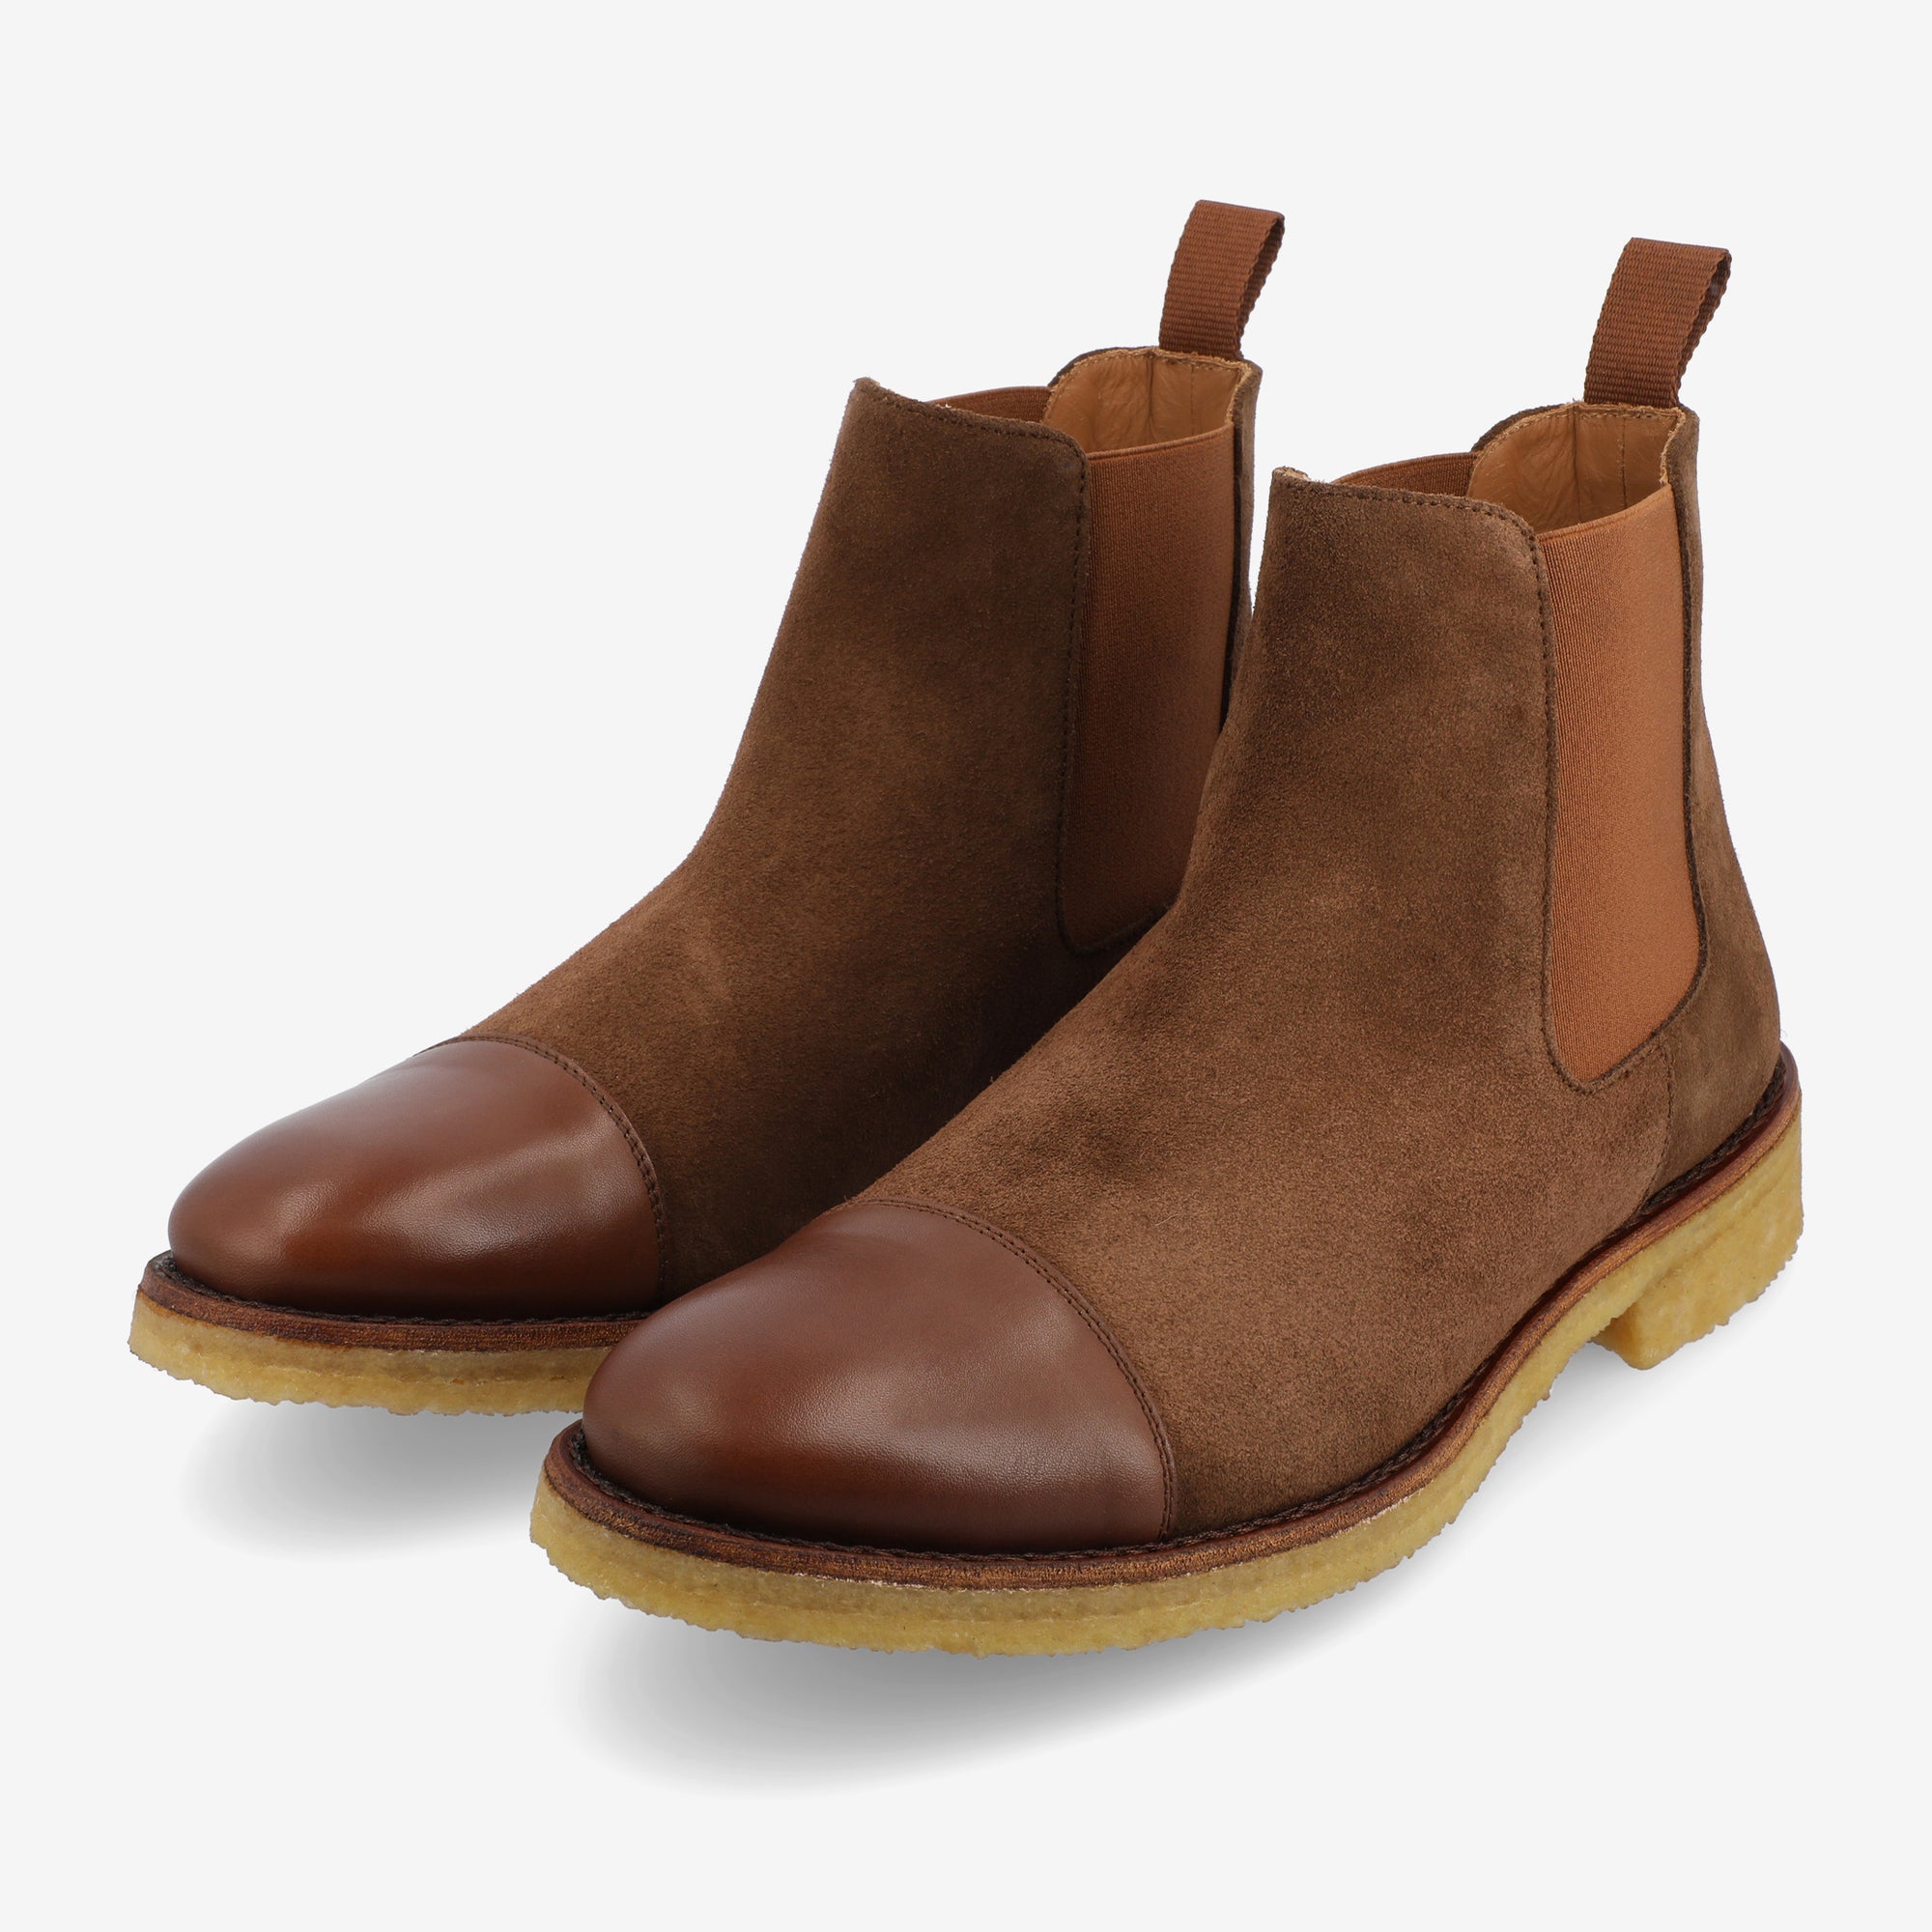 The Outback Boot in Mocha